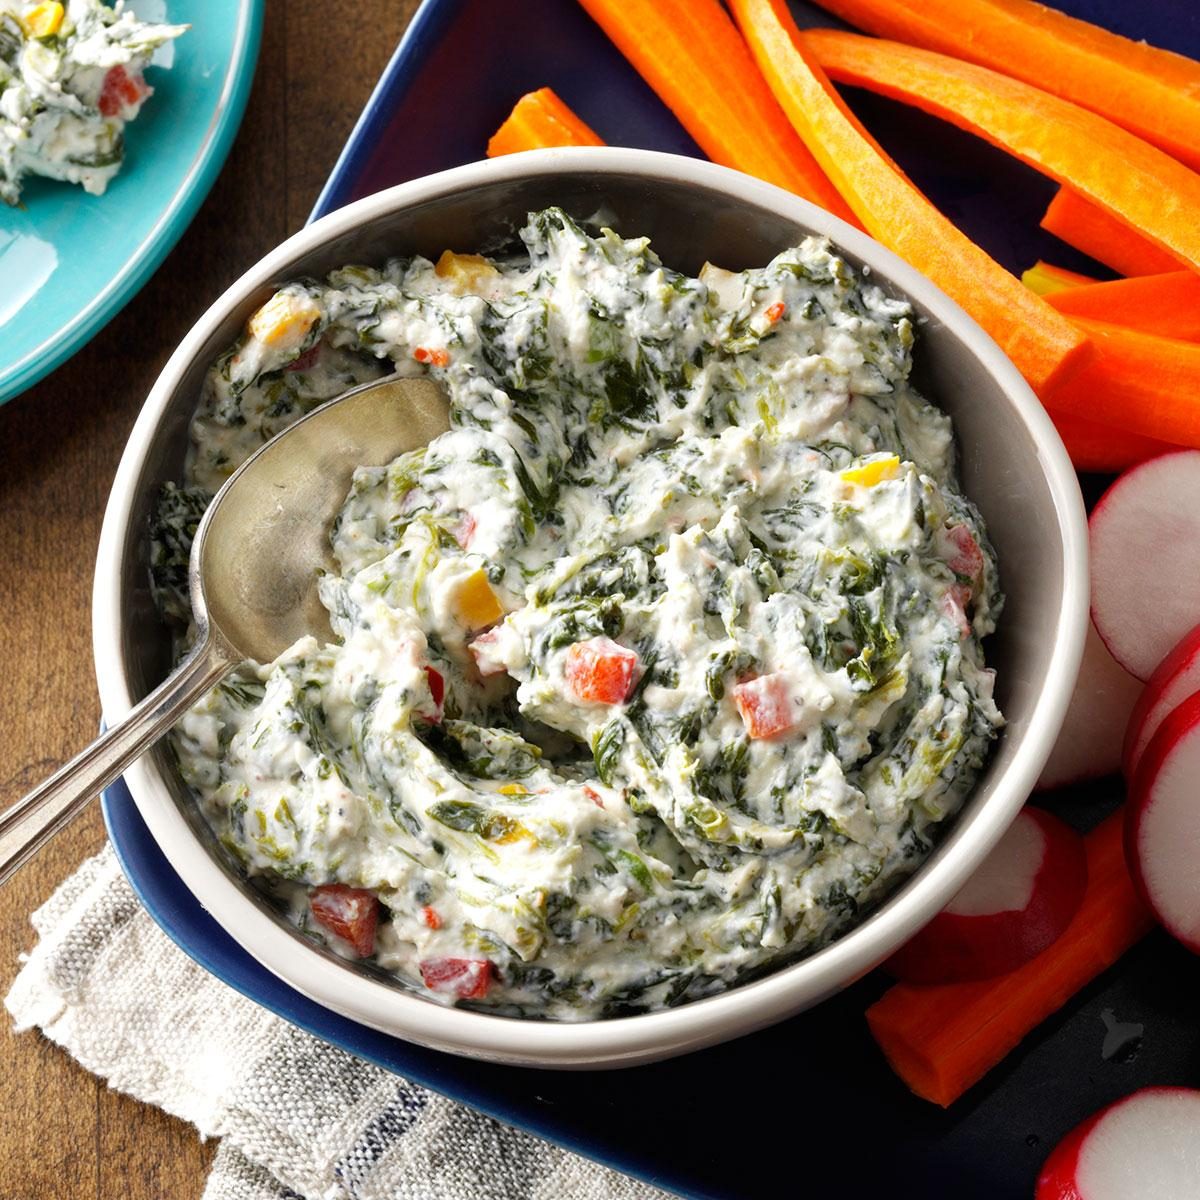 10 Delicious dips for a light lunch or snack - Reader's Digest